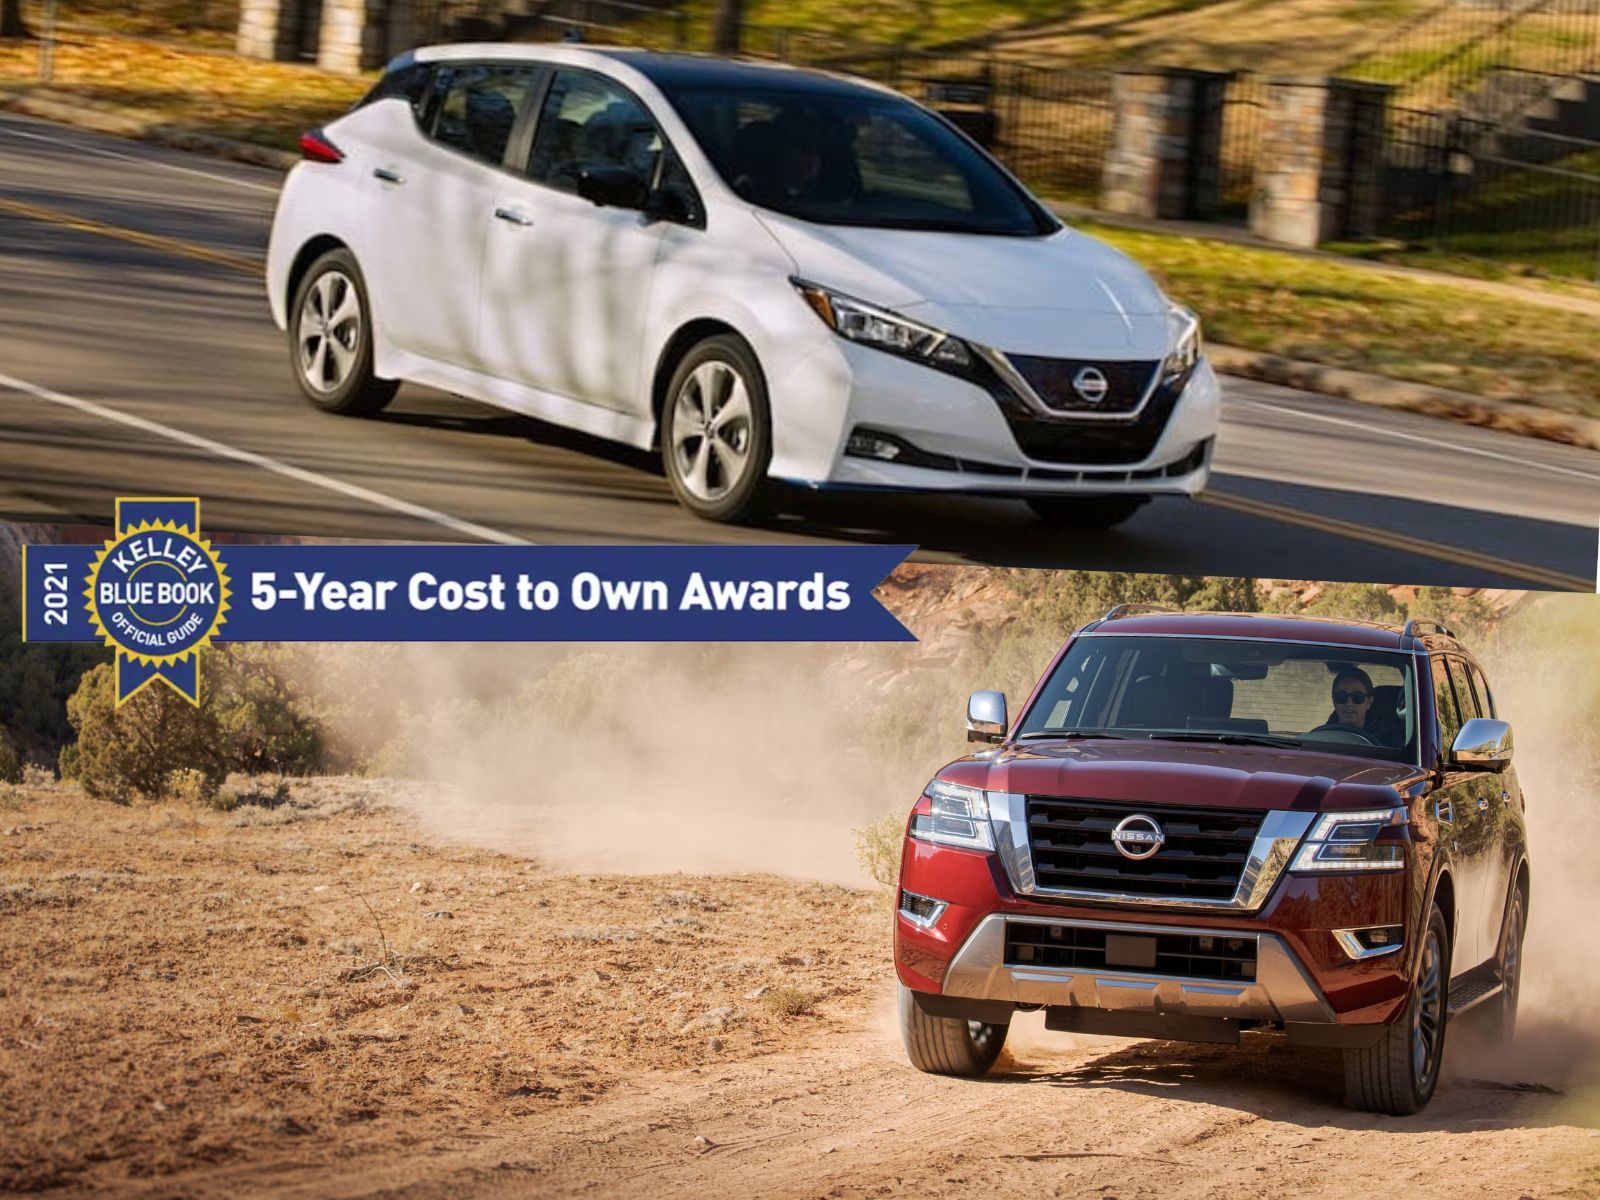 Built To Last: 2021 Nissan LEAF & Armada Take Home Top Honours From Kelley Blue Book